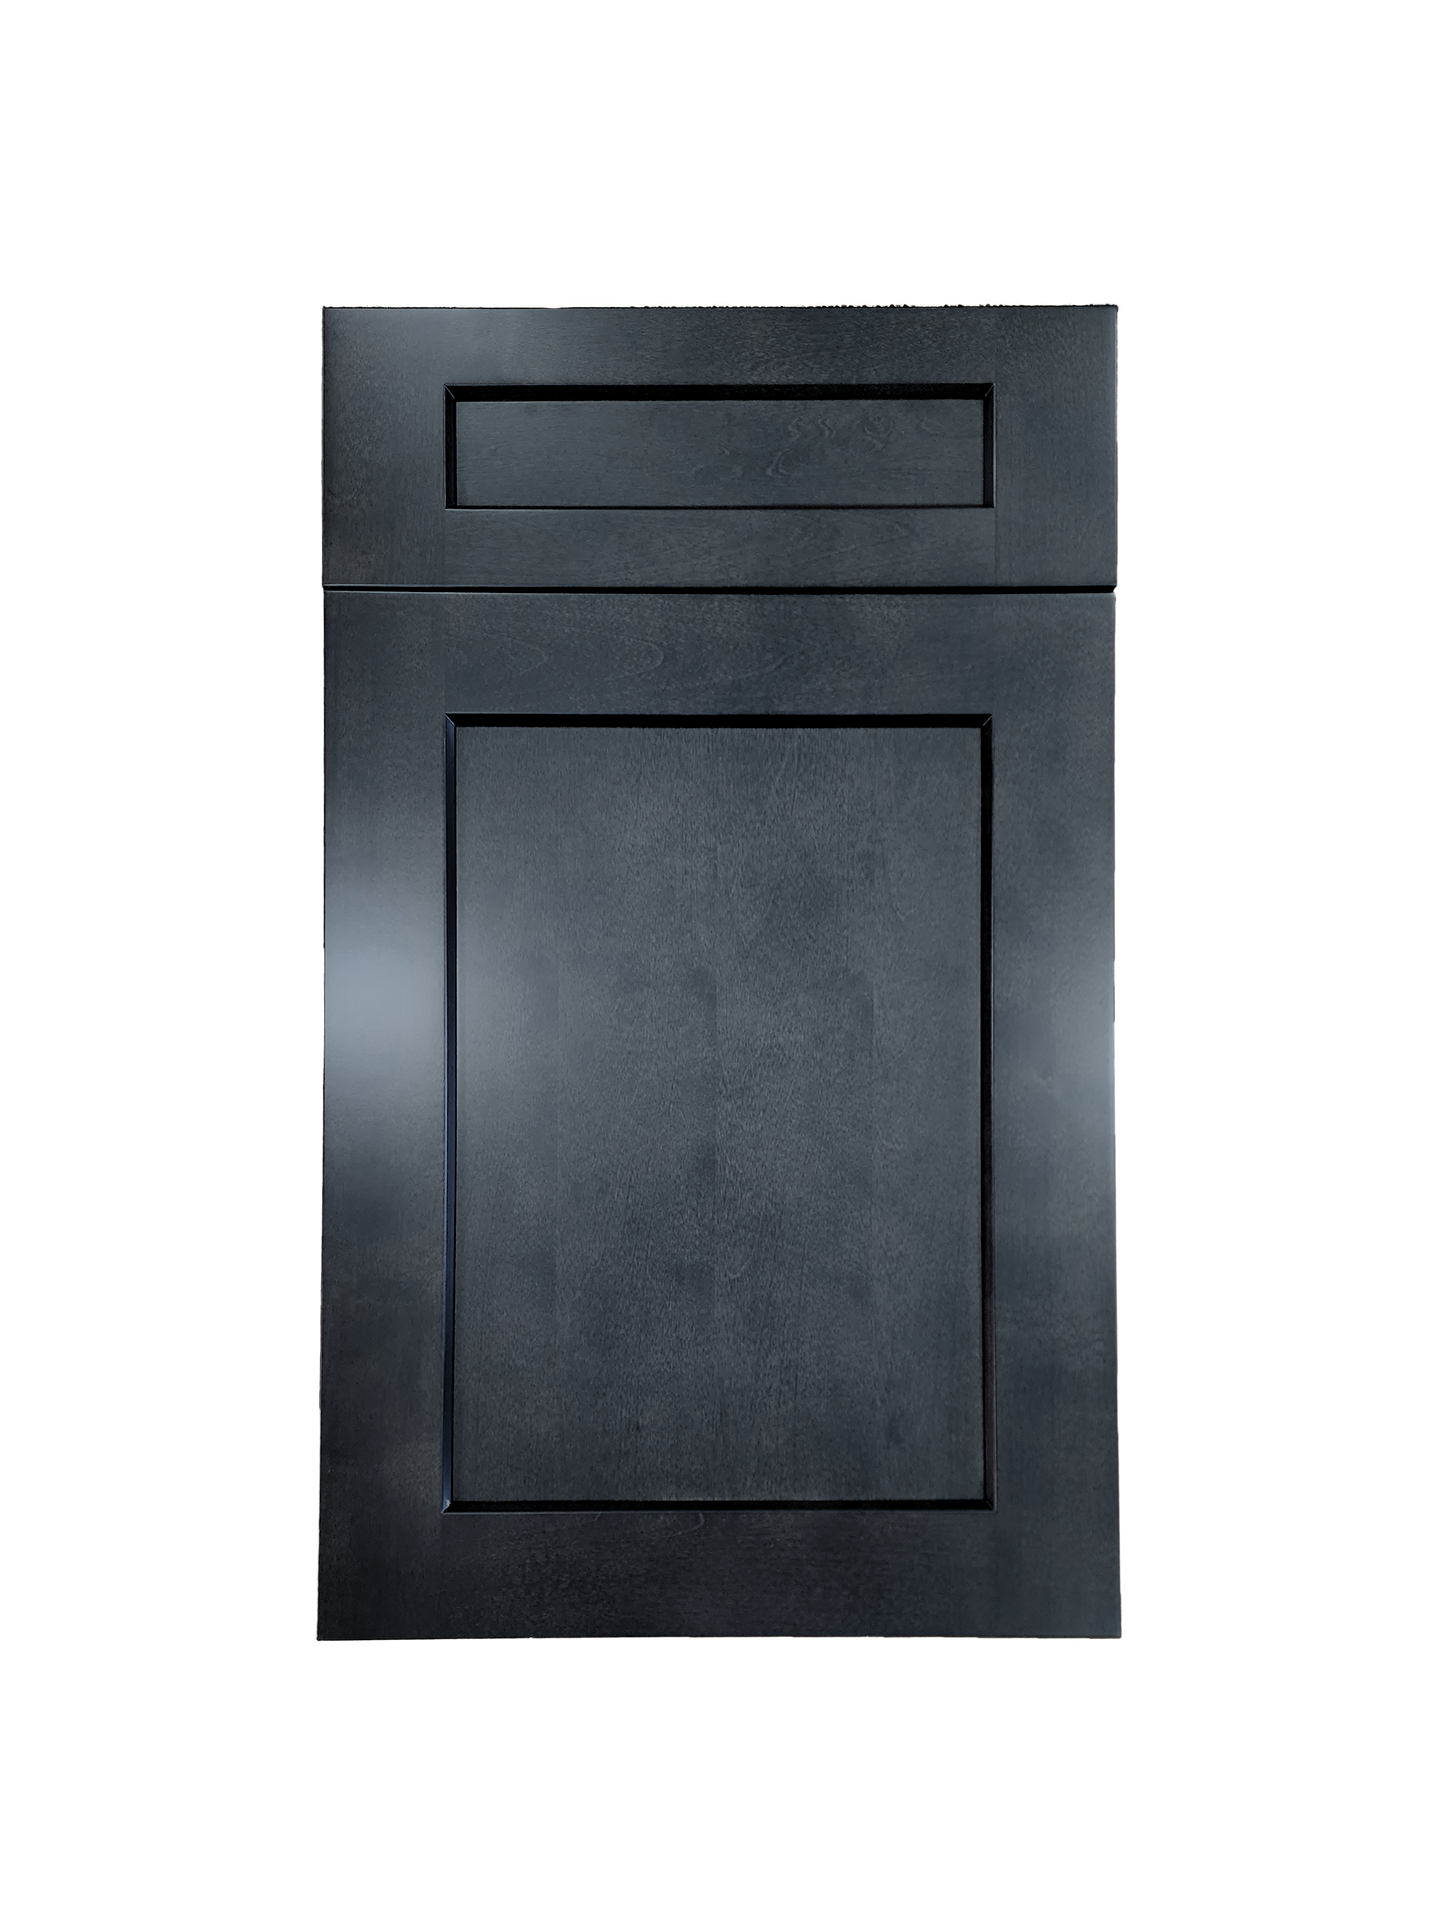 Stormy Grey Wall Cabinet 18 inches wide 12 inches deep 36 inches tall with Stormy Grey box and Stormy Grey doors